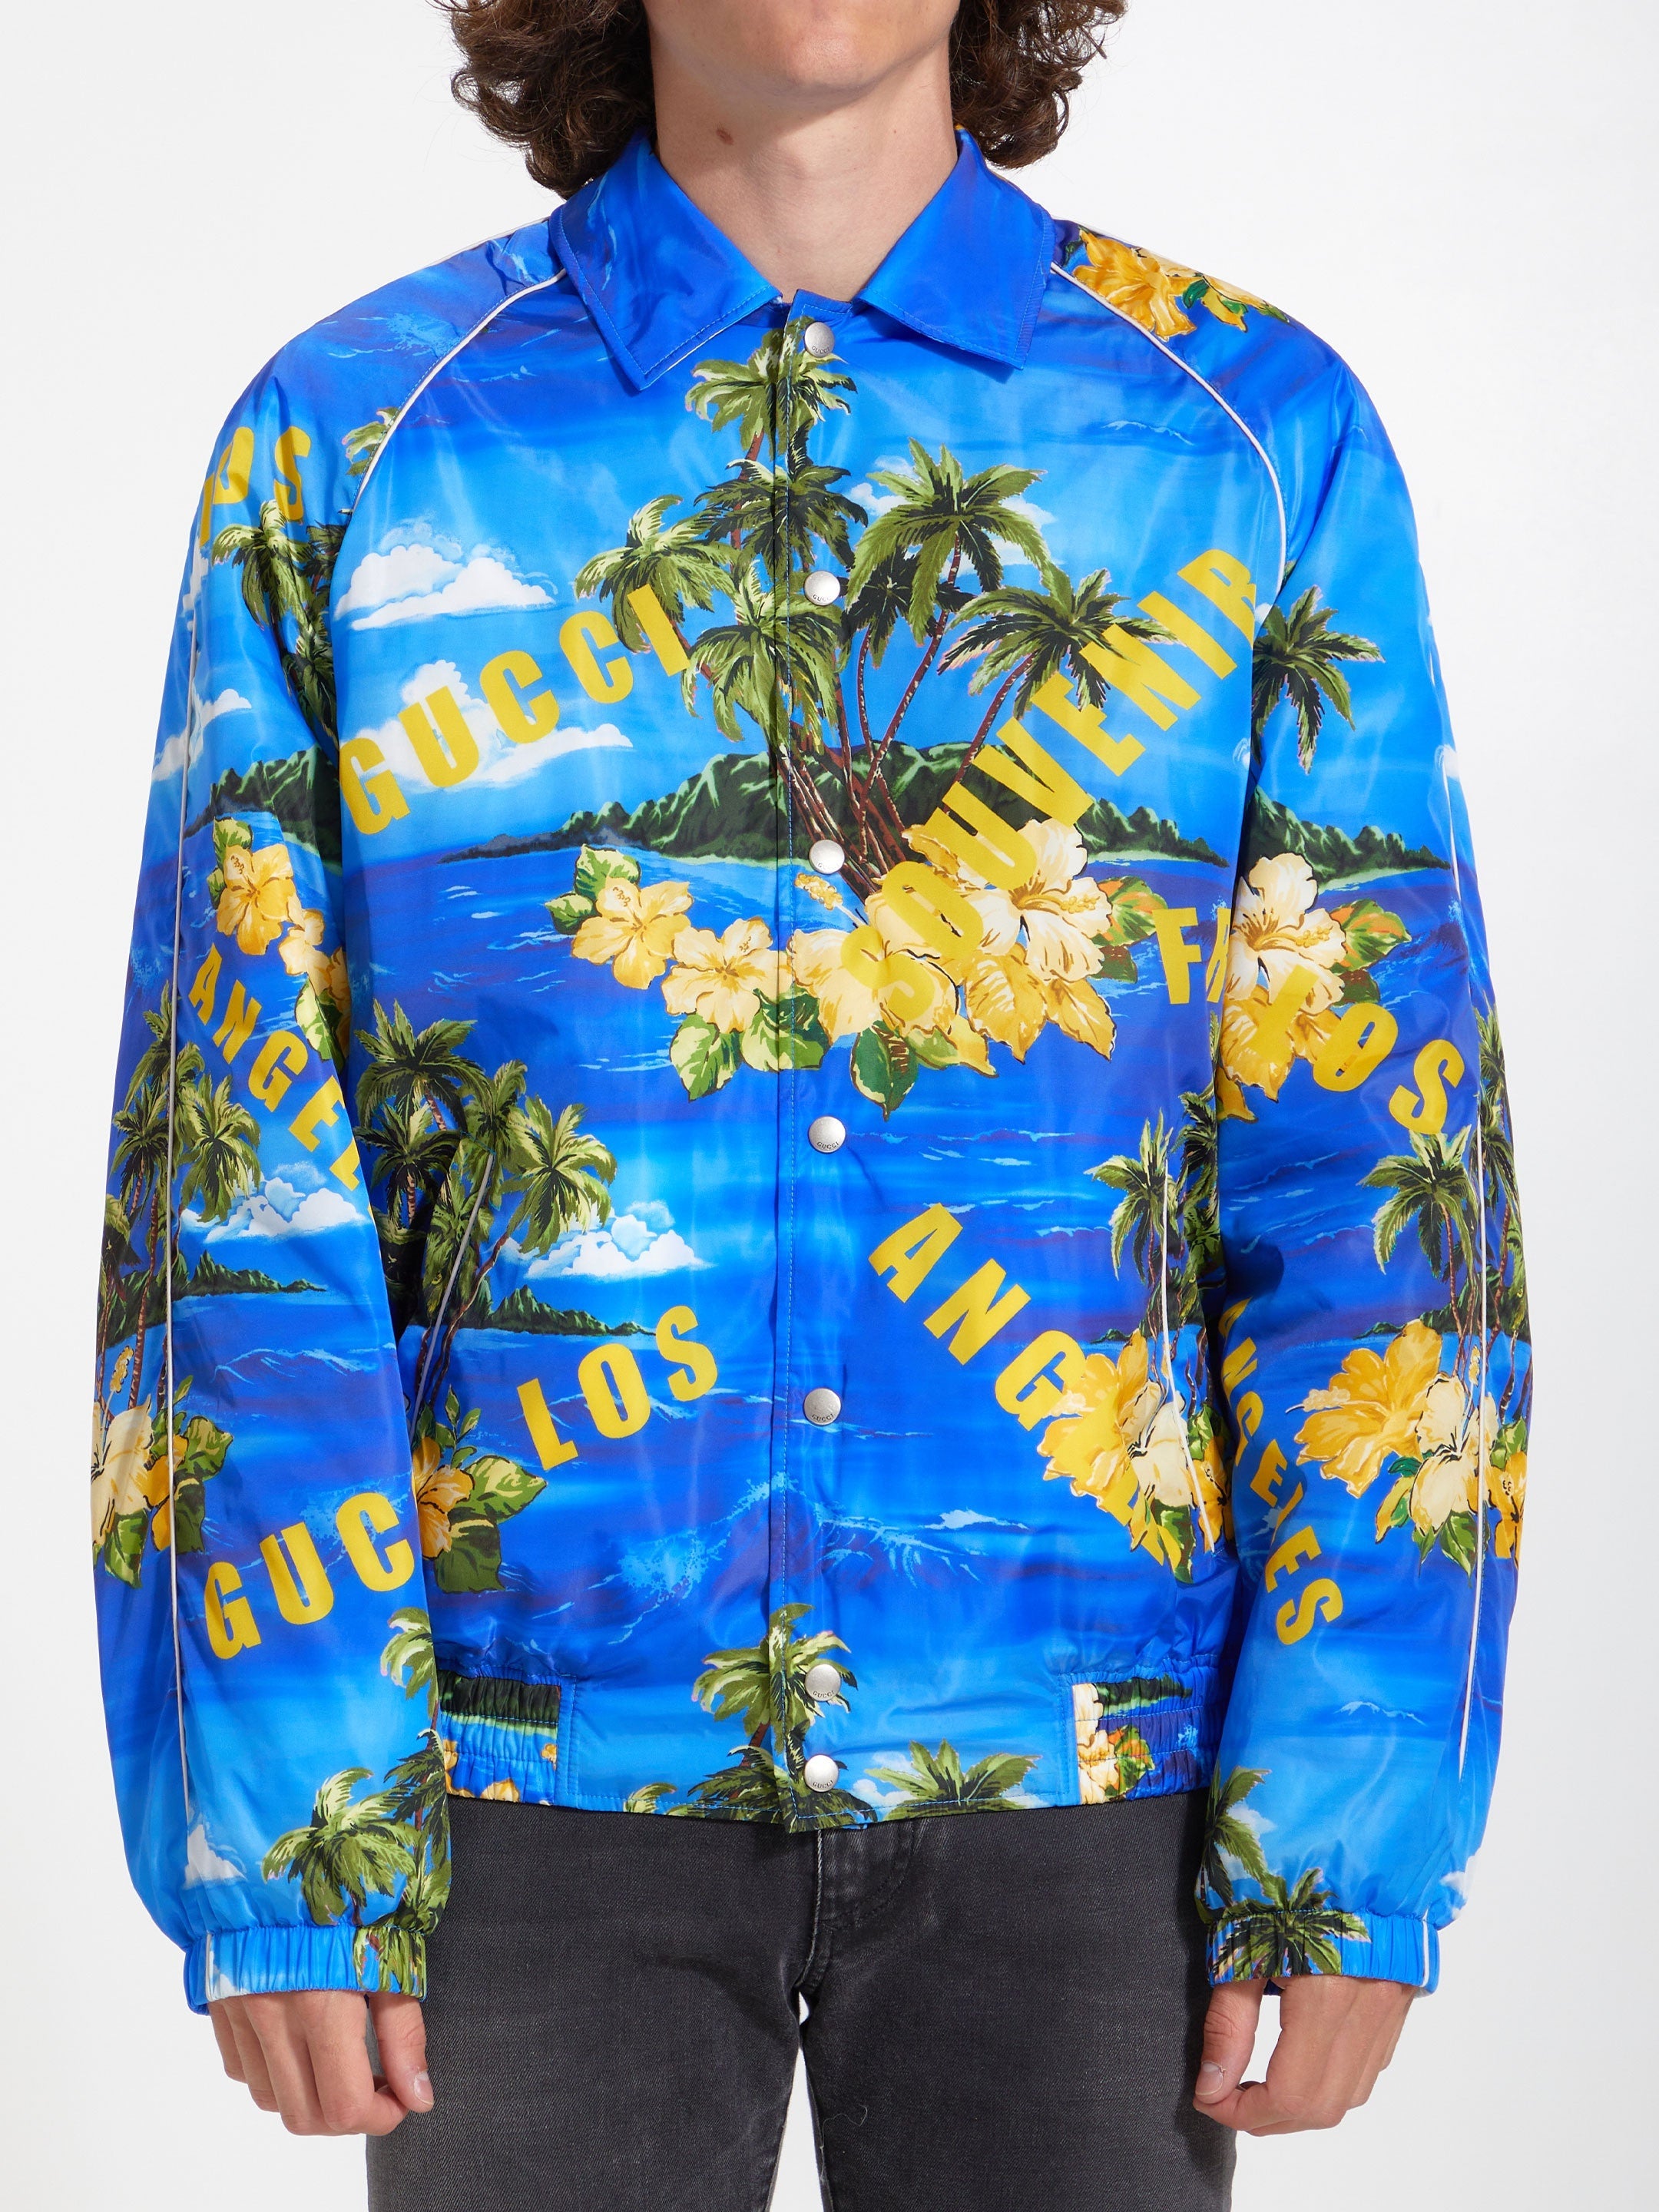 GUCCI-OUTLET-SALE-Nylon-jacket-with-print-Jacken-Mantel-48-BLUE-ARCHIVE-COLLECTION.jpg